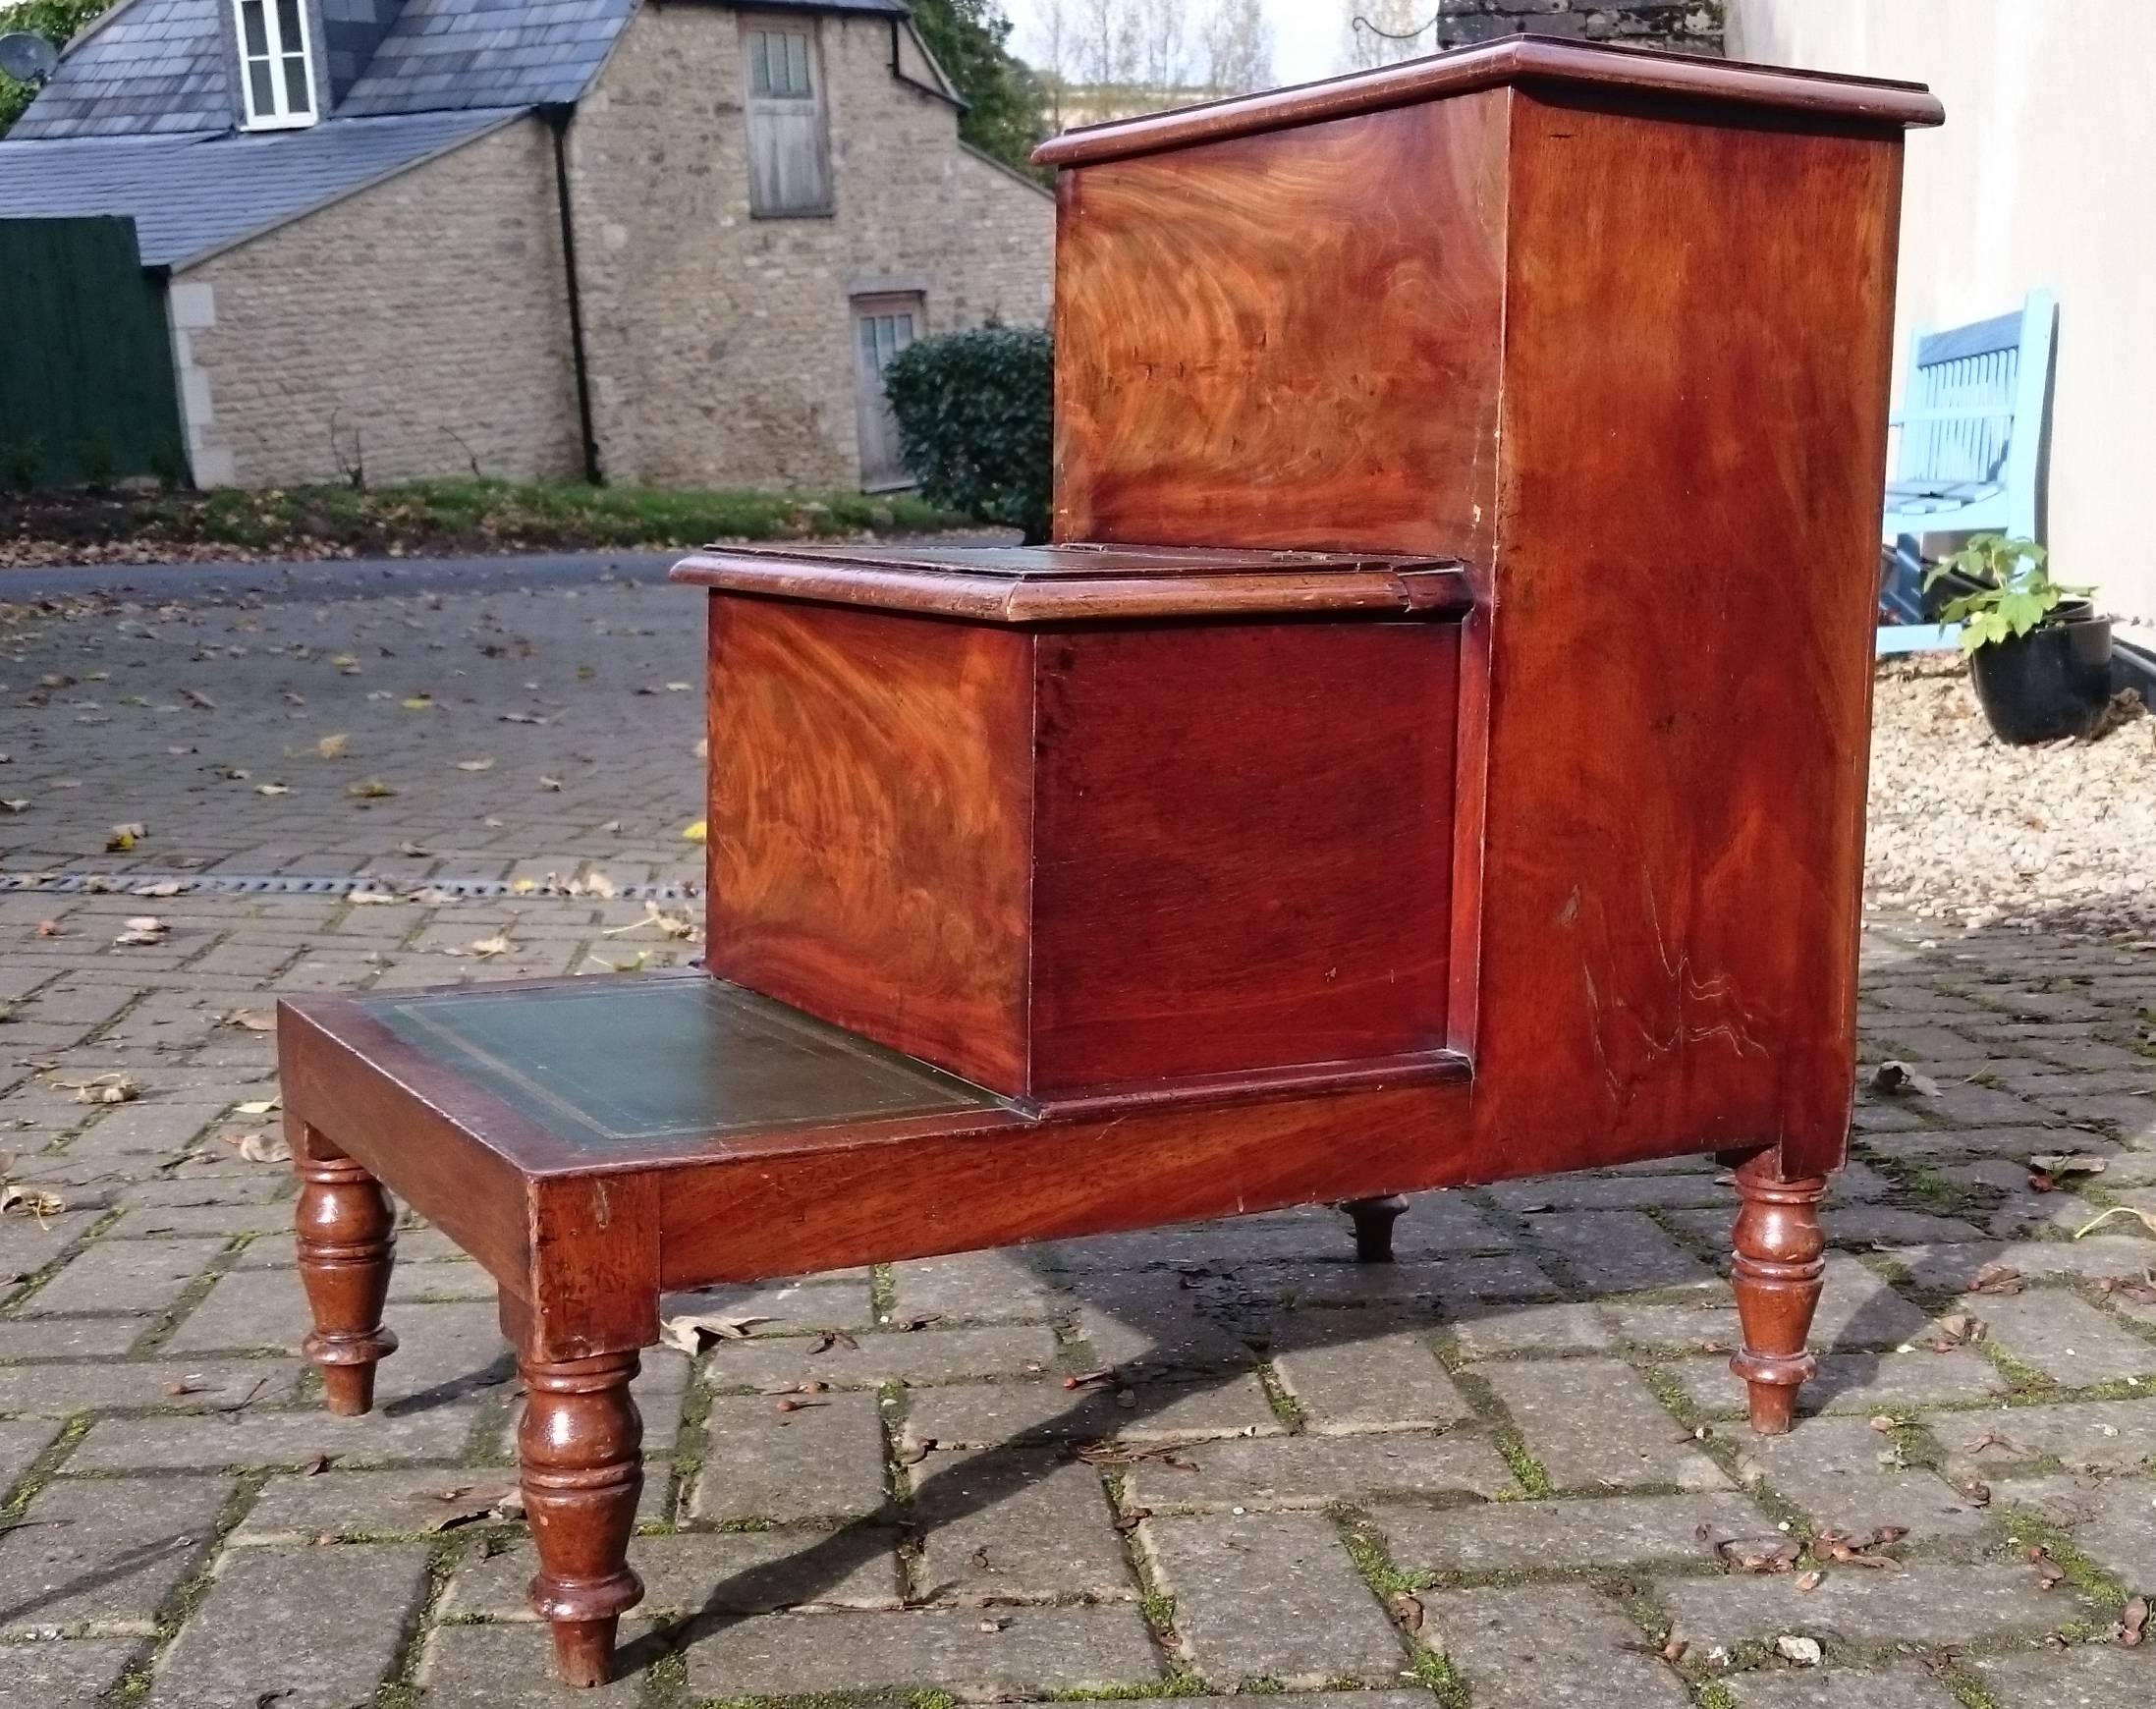 Early 19th century Regency mahogany bedroom step commode. This set of steps has a hidden compartment for night time emergencies. It is complete with seat and pot which appear to be original. It is made of very good quality mahogany with flame